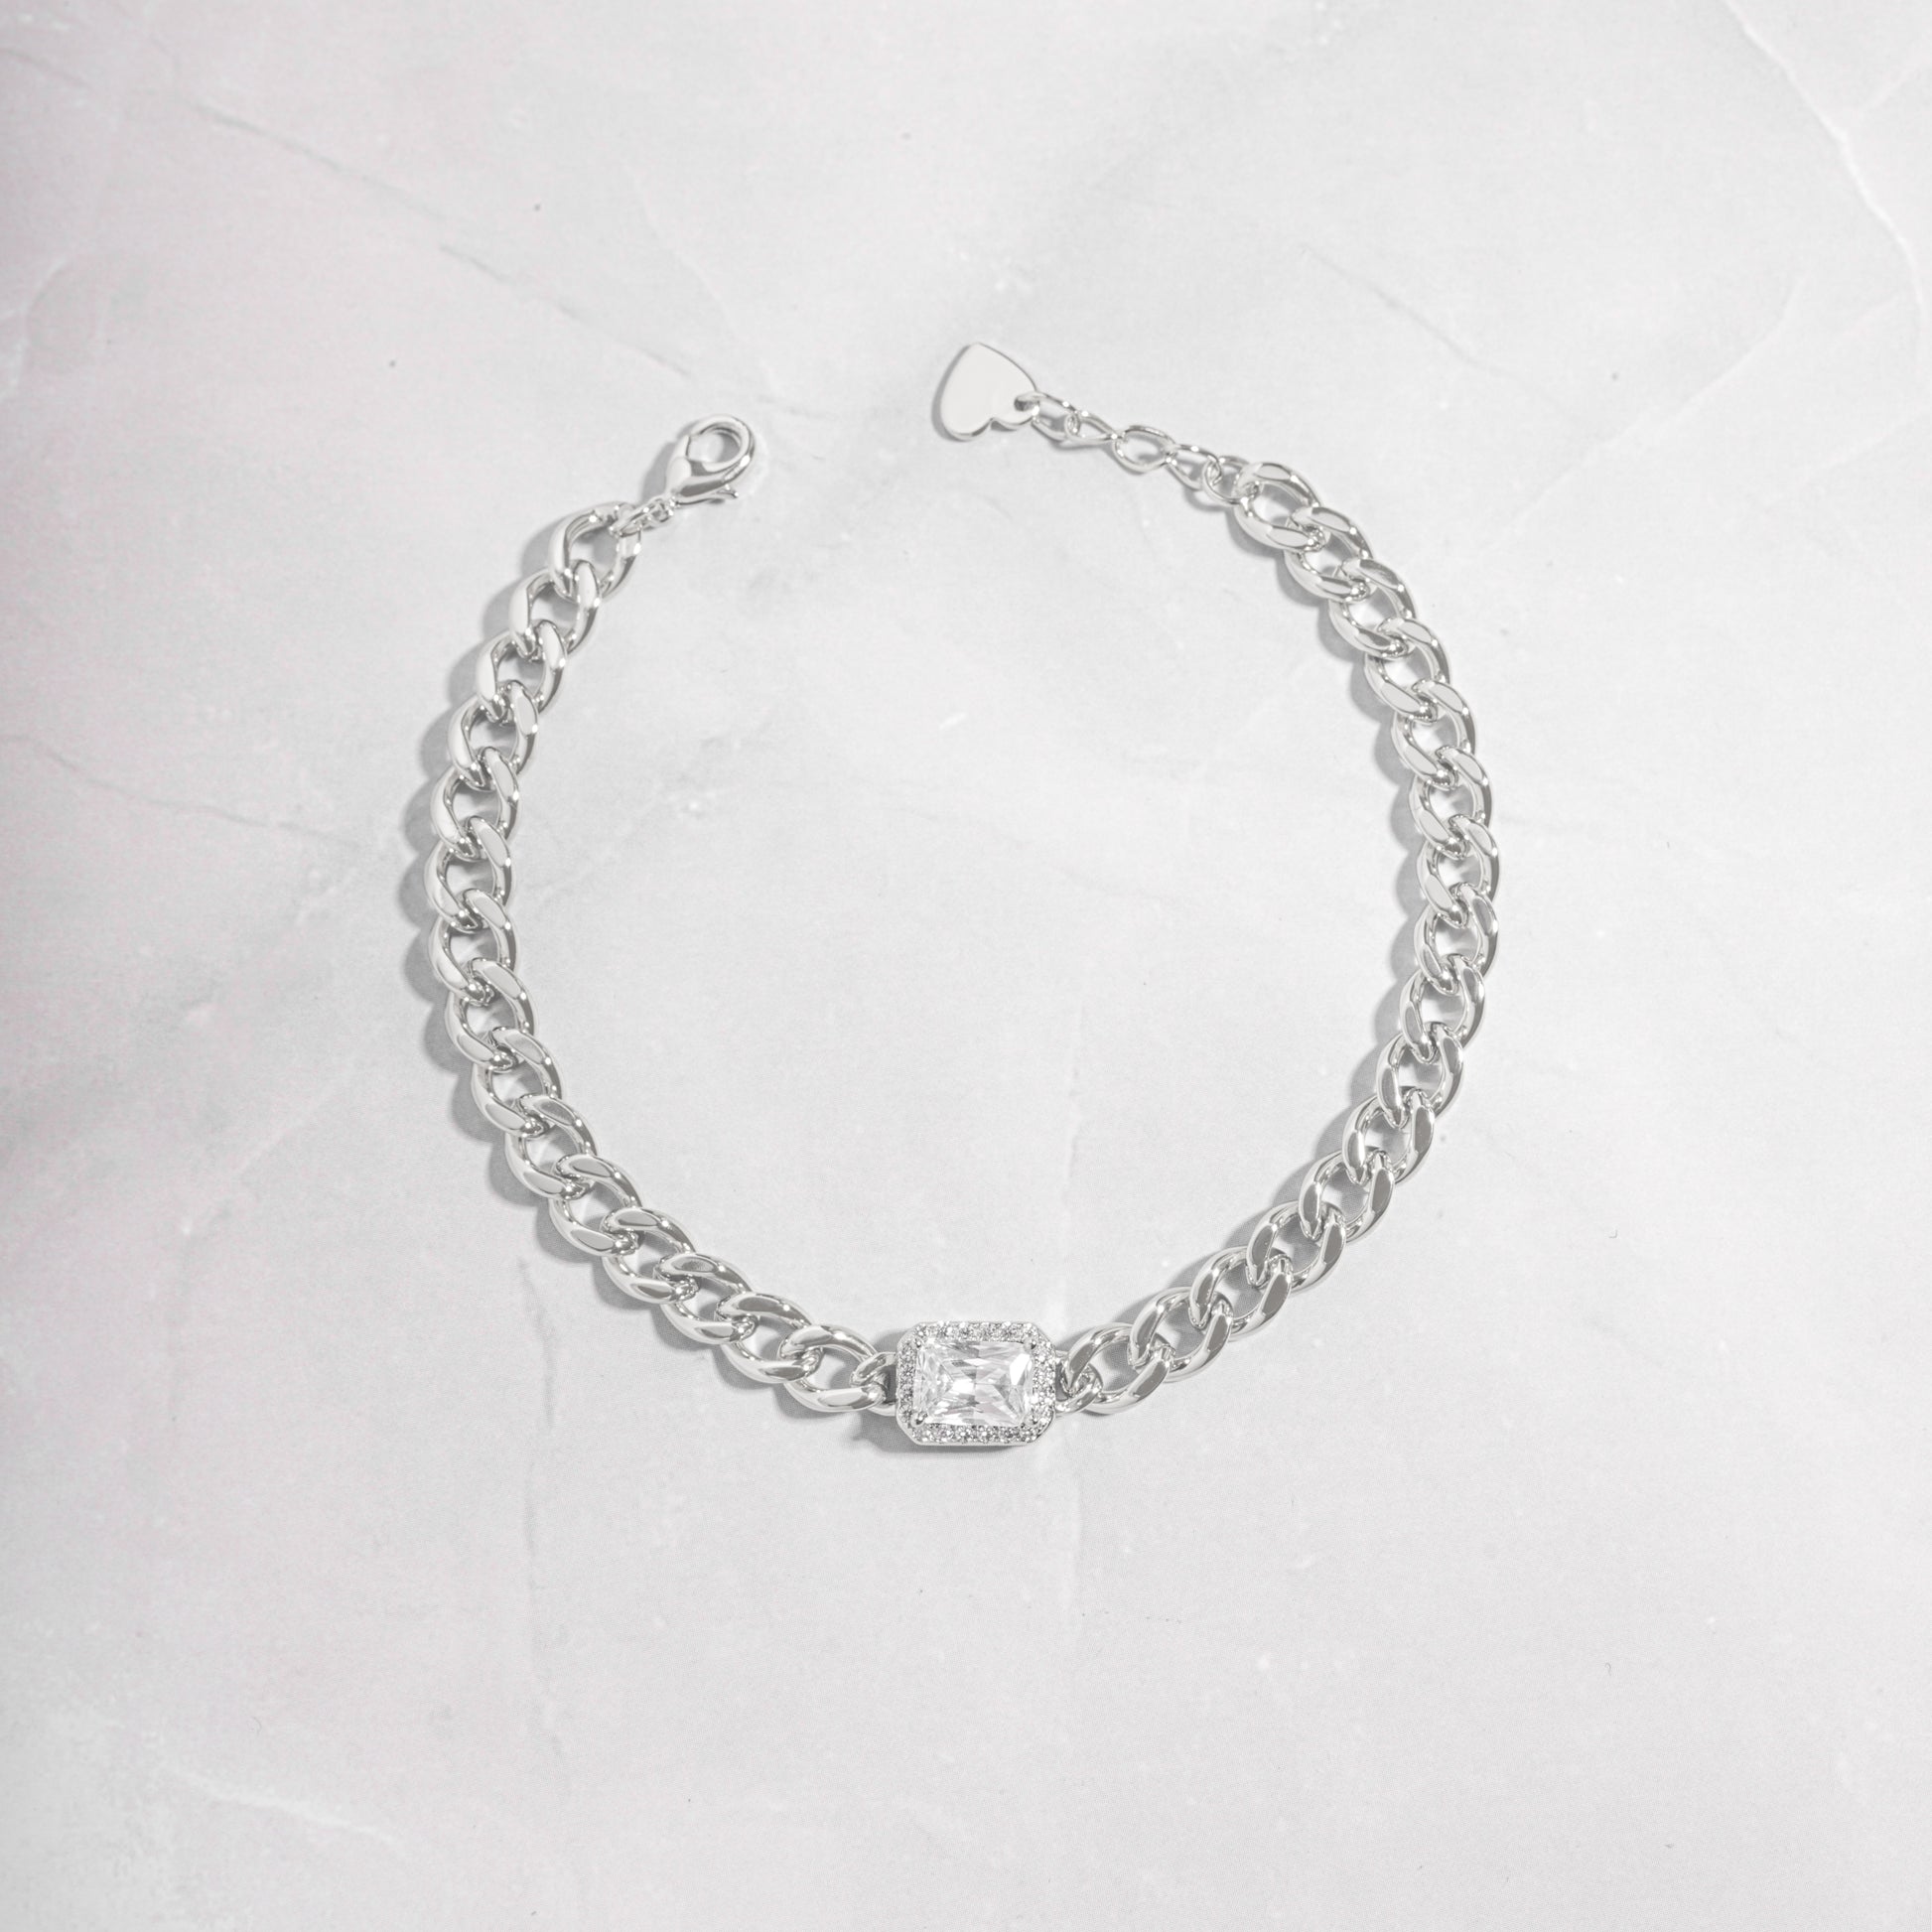 sterling silver statement chain bracelet with diamond charm